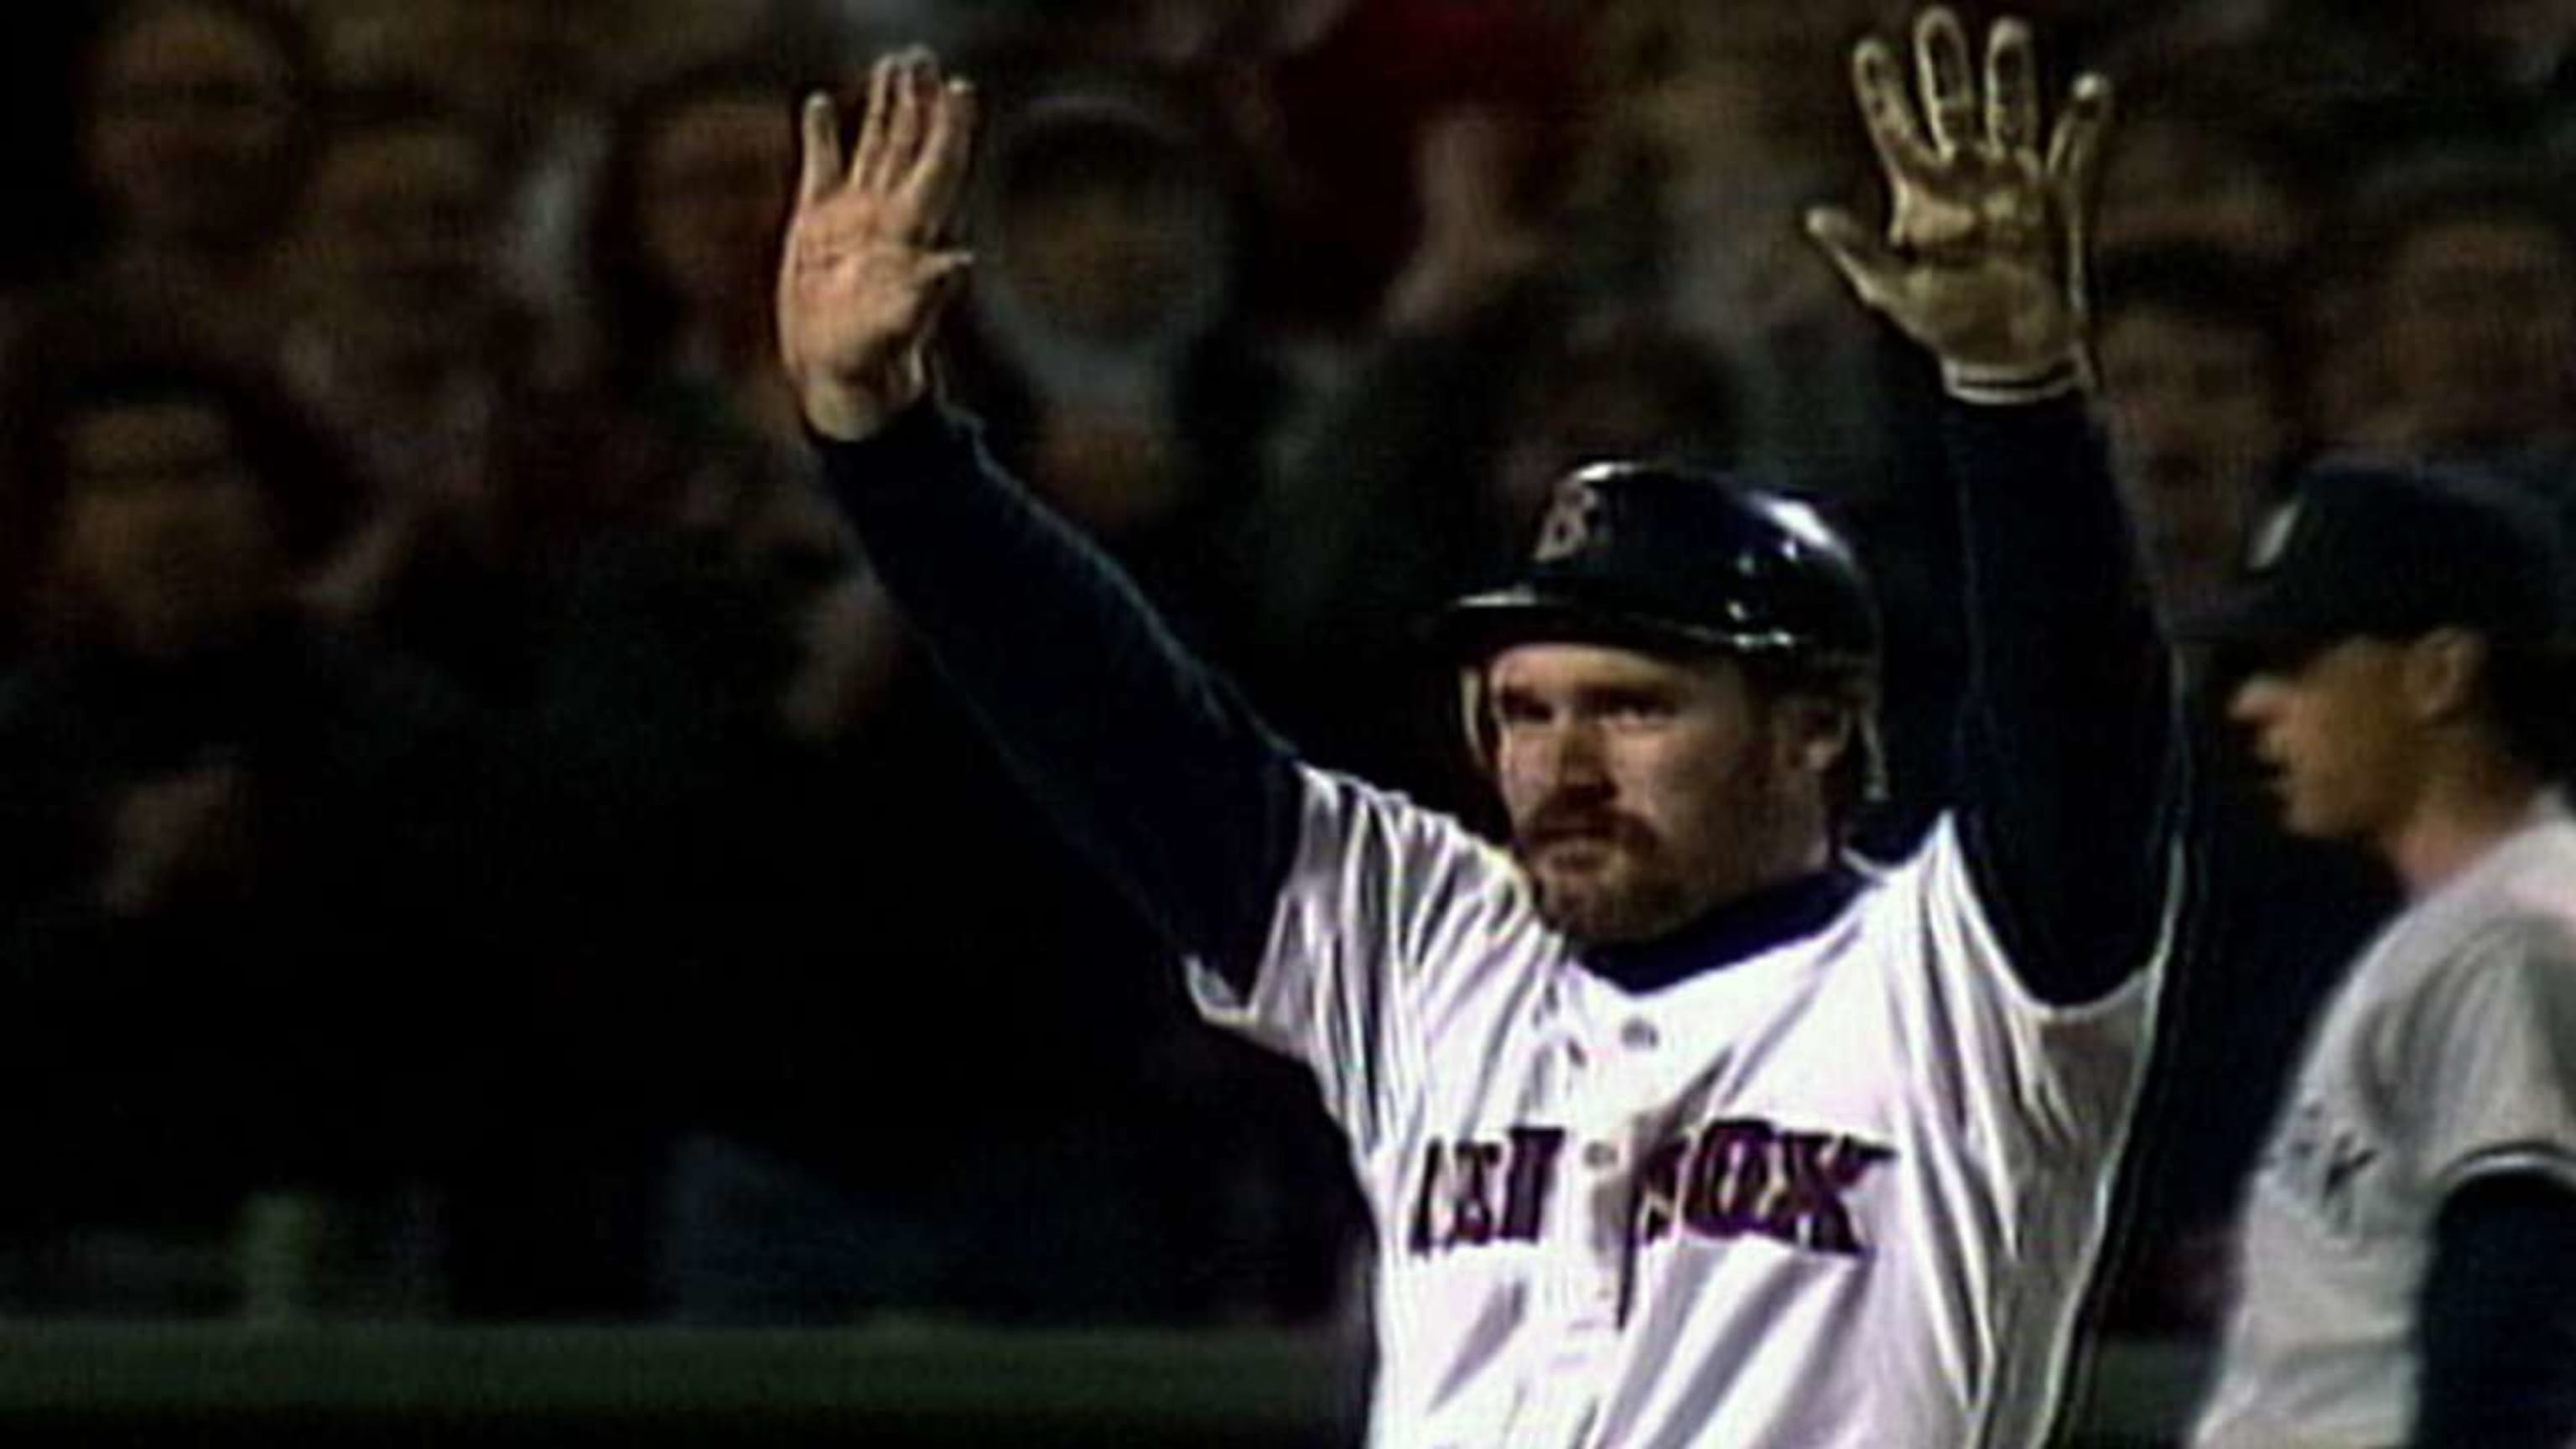 Wade Boggs hit first HR in Tampa Bay Rays' history 22 years ago today